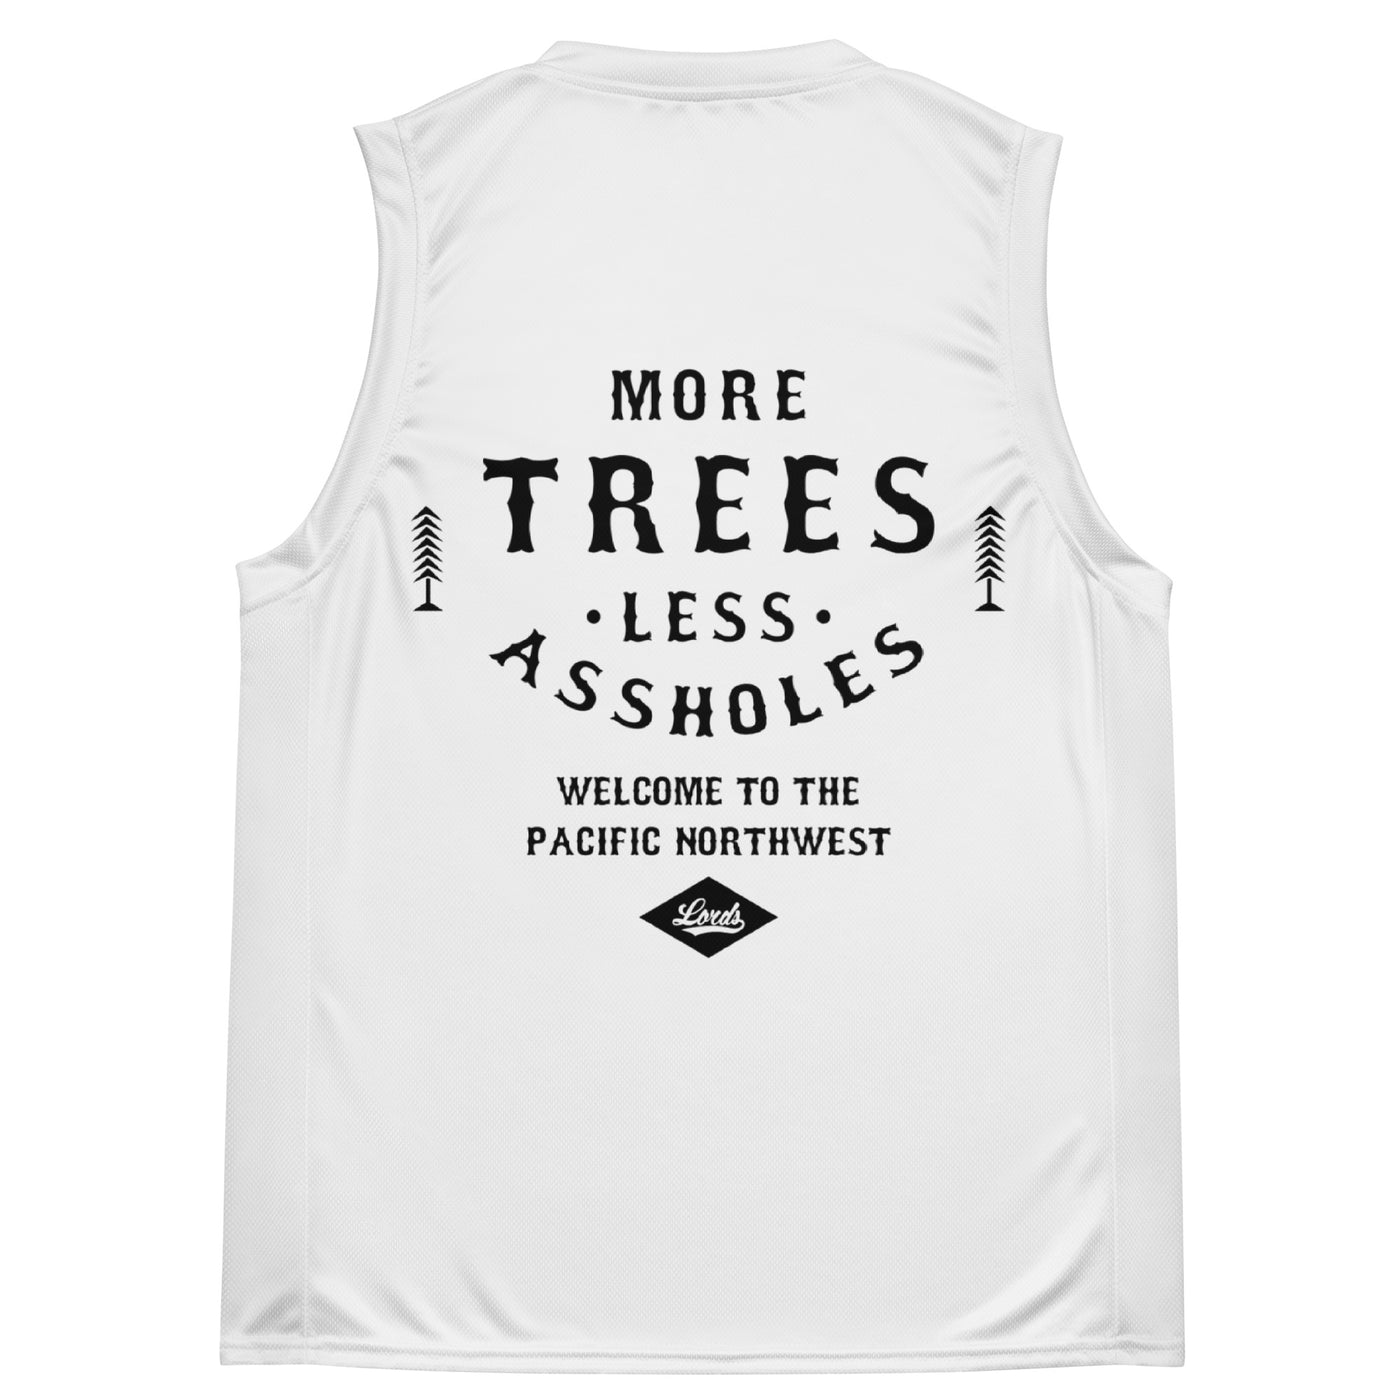 Lords x More Trees Hardwood Jersey - White/Black